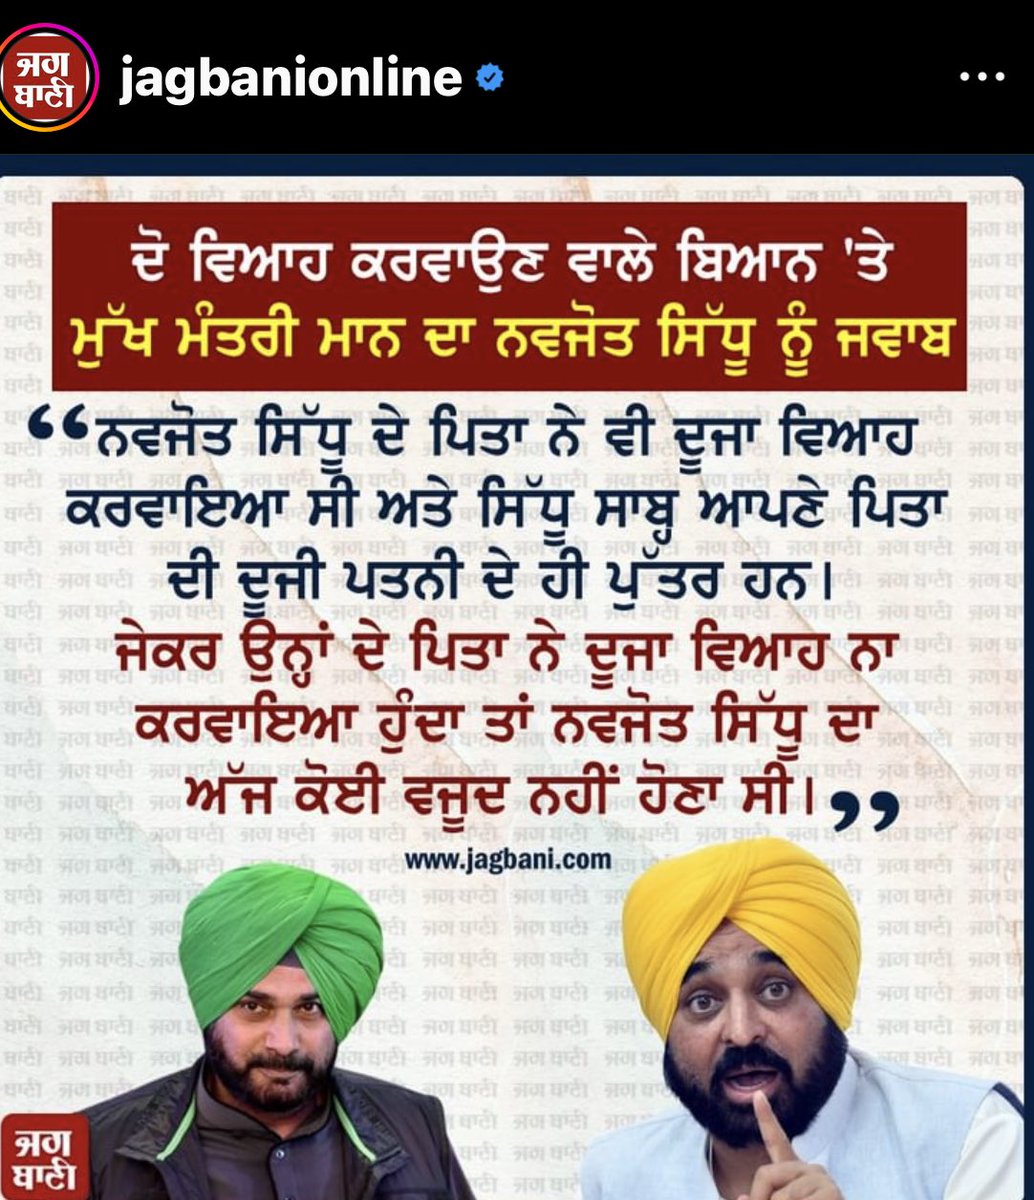 CM ,Bhagwant Mann ji I don’t think Navjot has commented seriously about your personal life because we have absolutely no right to talk about it. But you have got some facts wrong. Navjot Sidhu’s father, (Advocate General Punjab ) Mr Bhagwant Singh Sidhu had only one marriage.